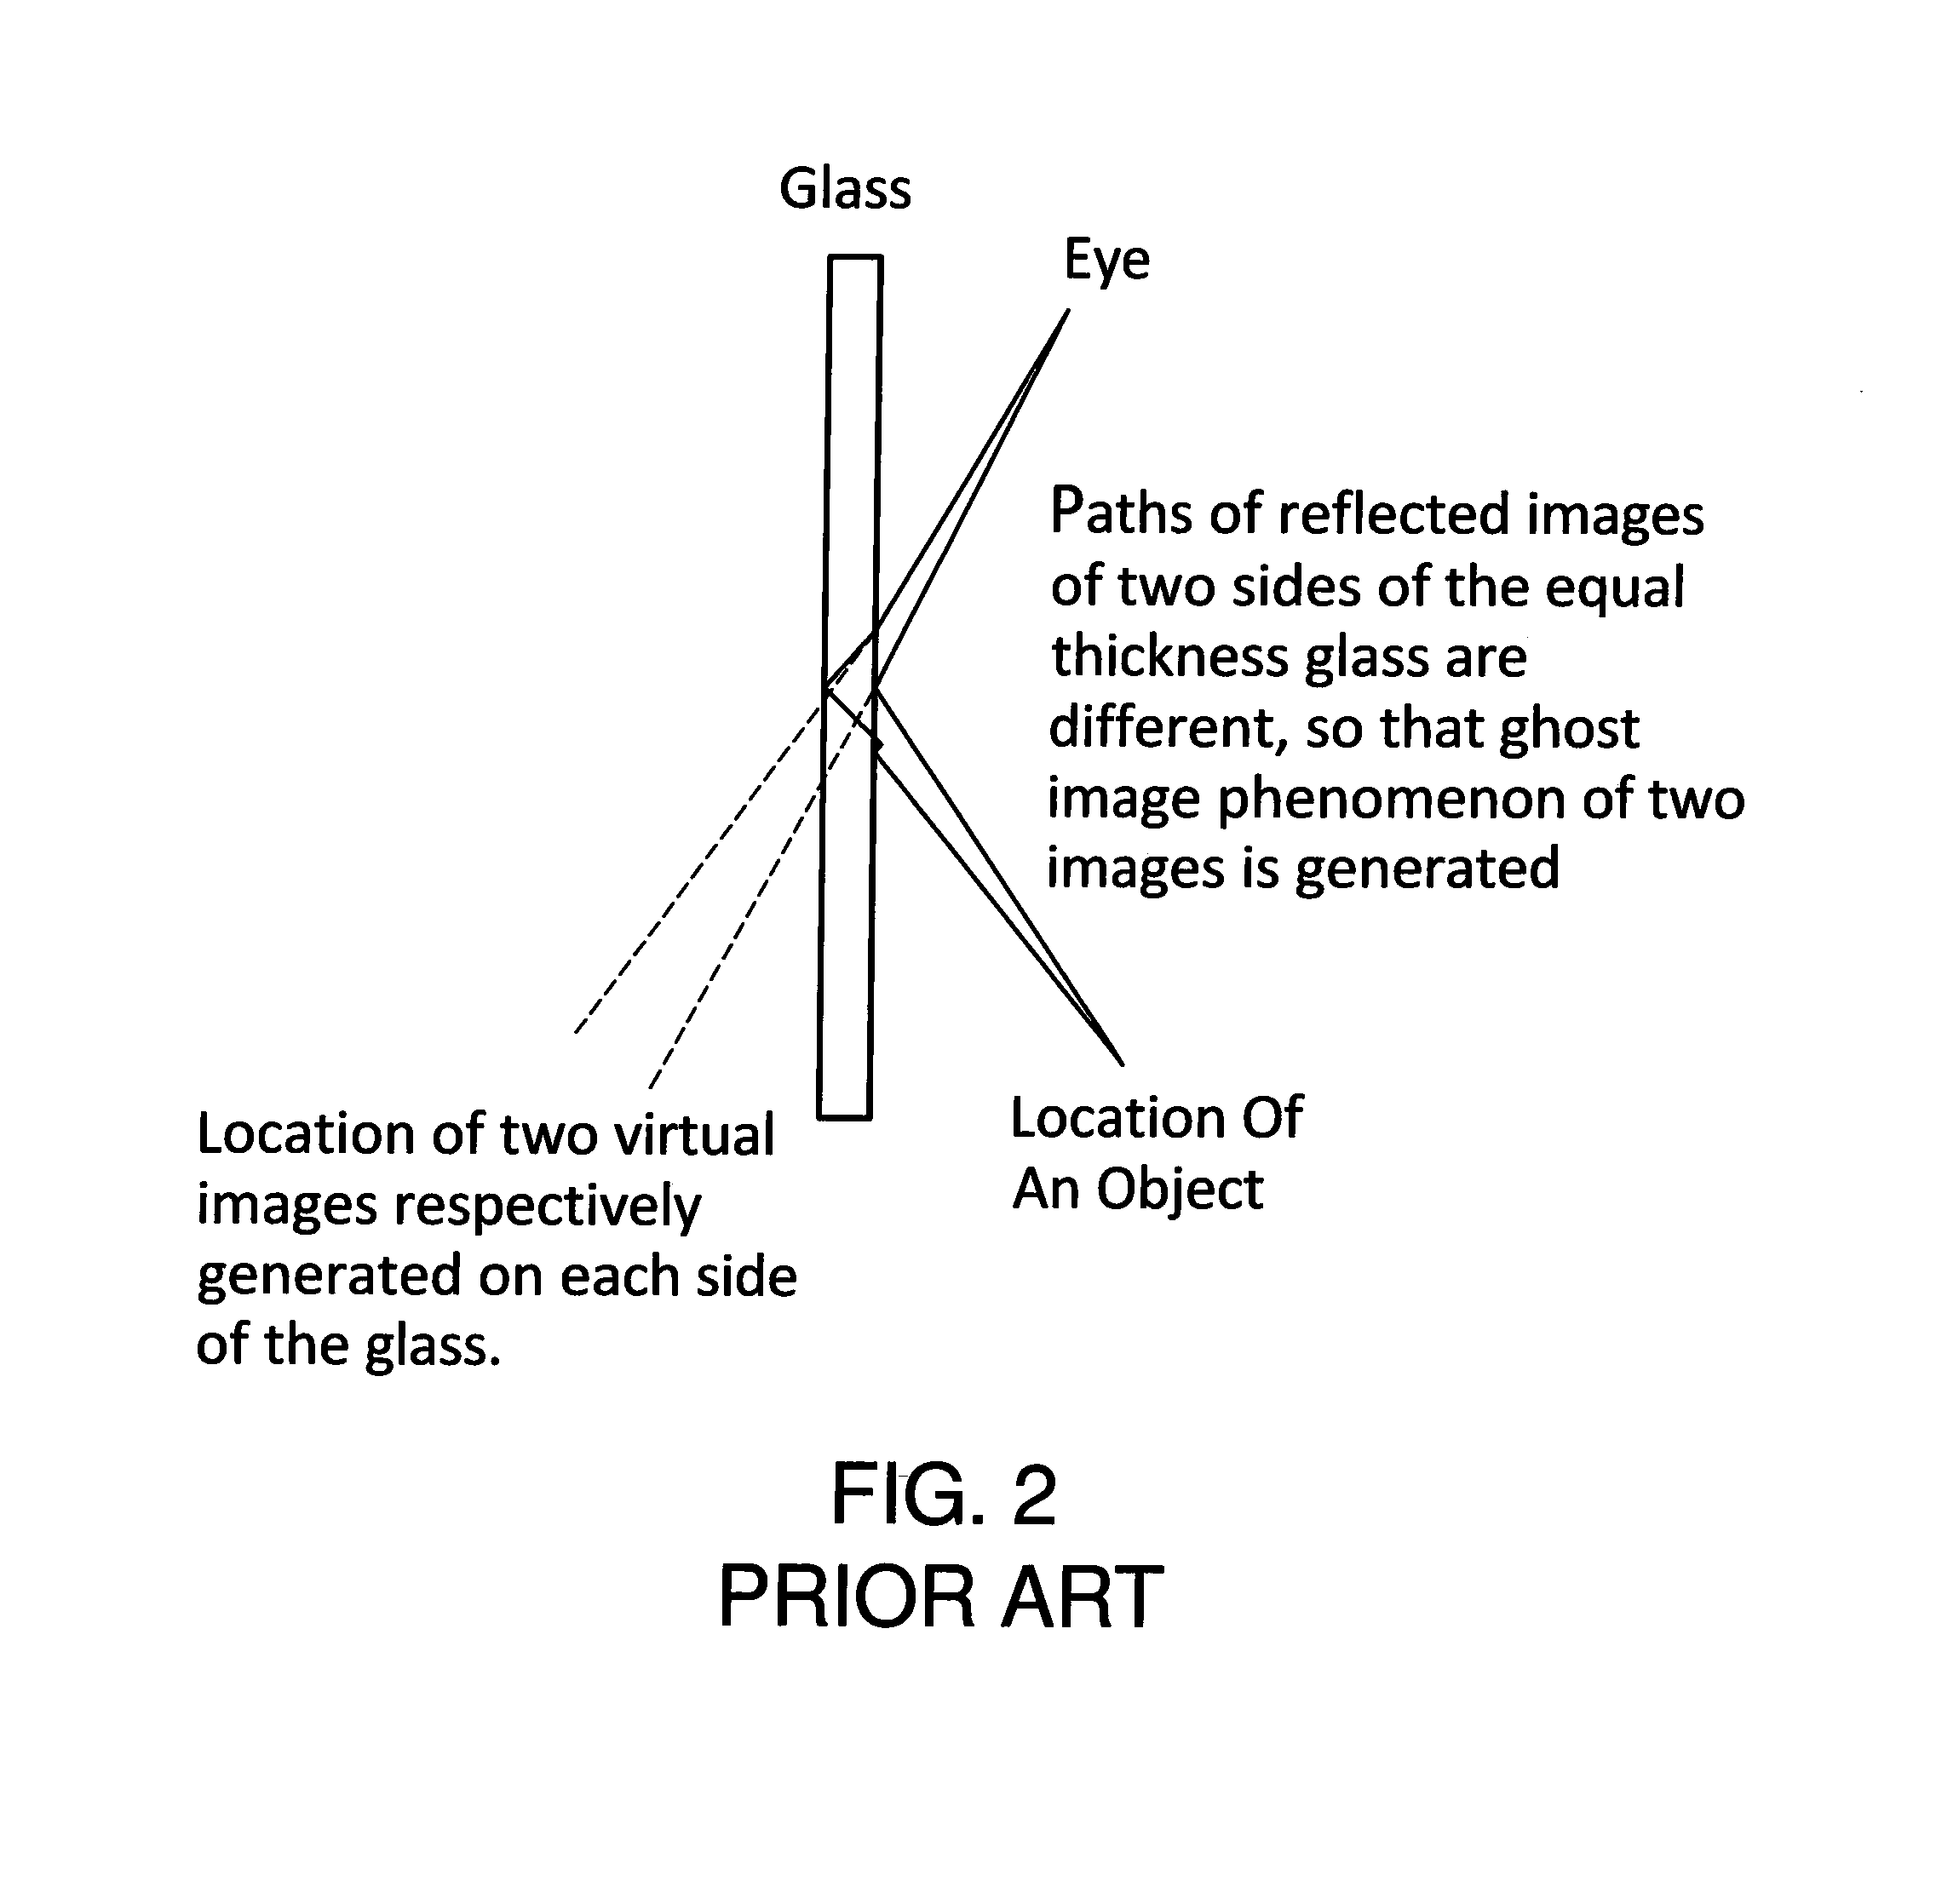 Vehicle head-up display device for preventing ghost images